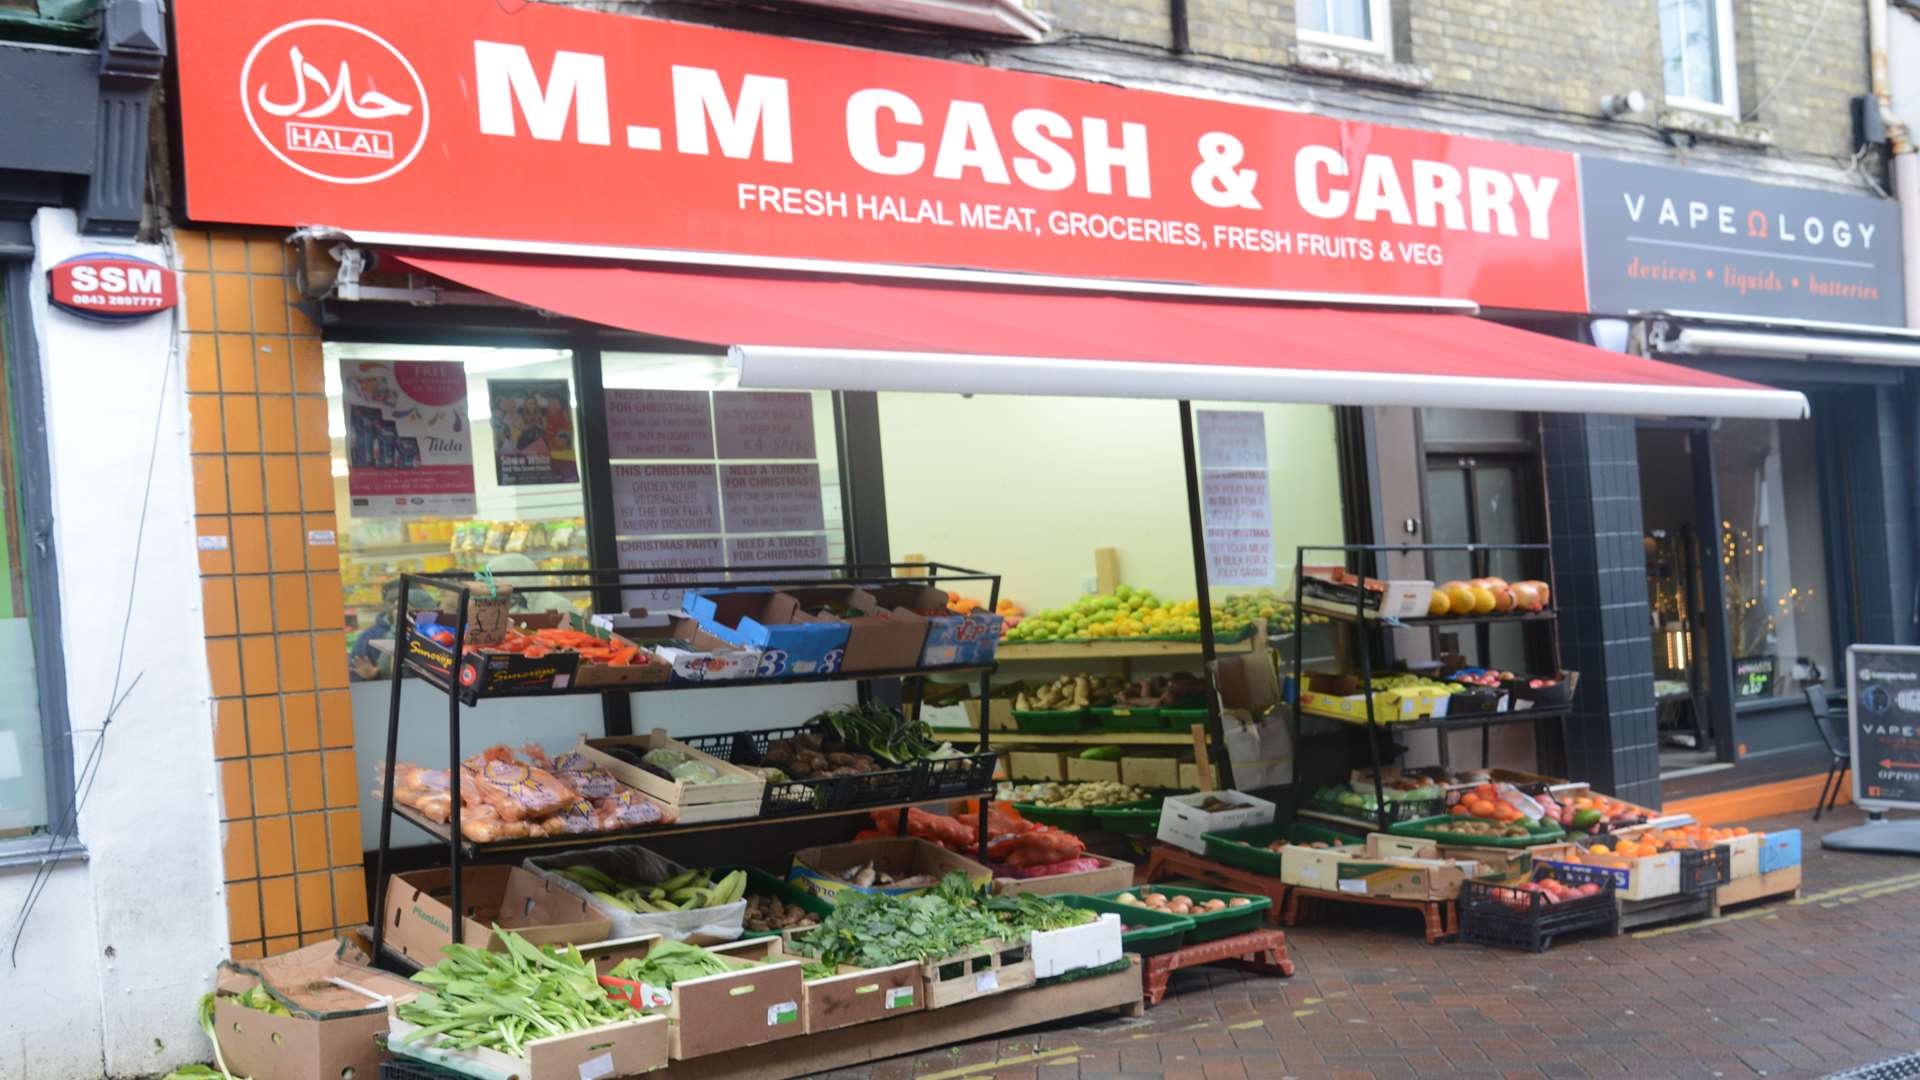 M M Cash and Carry in Ashford